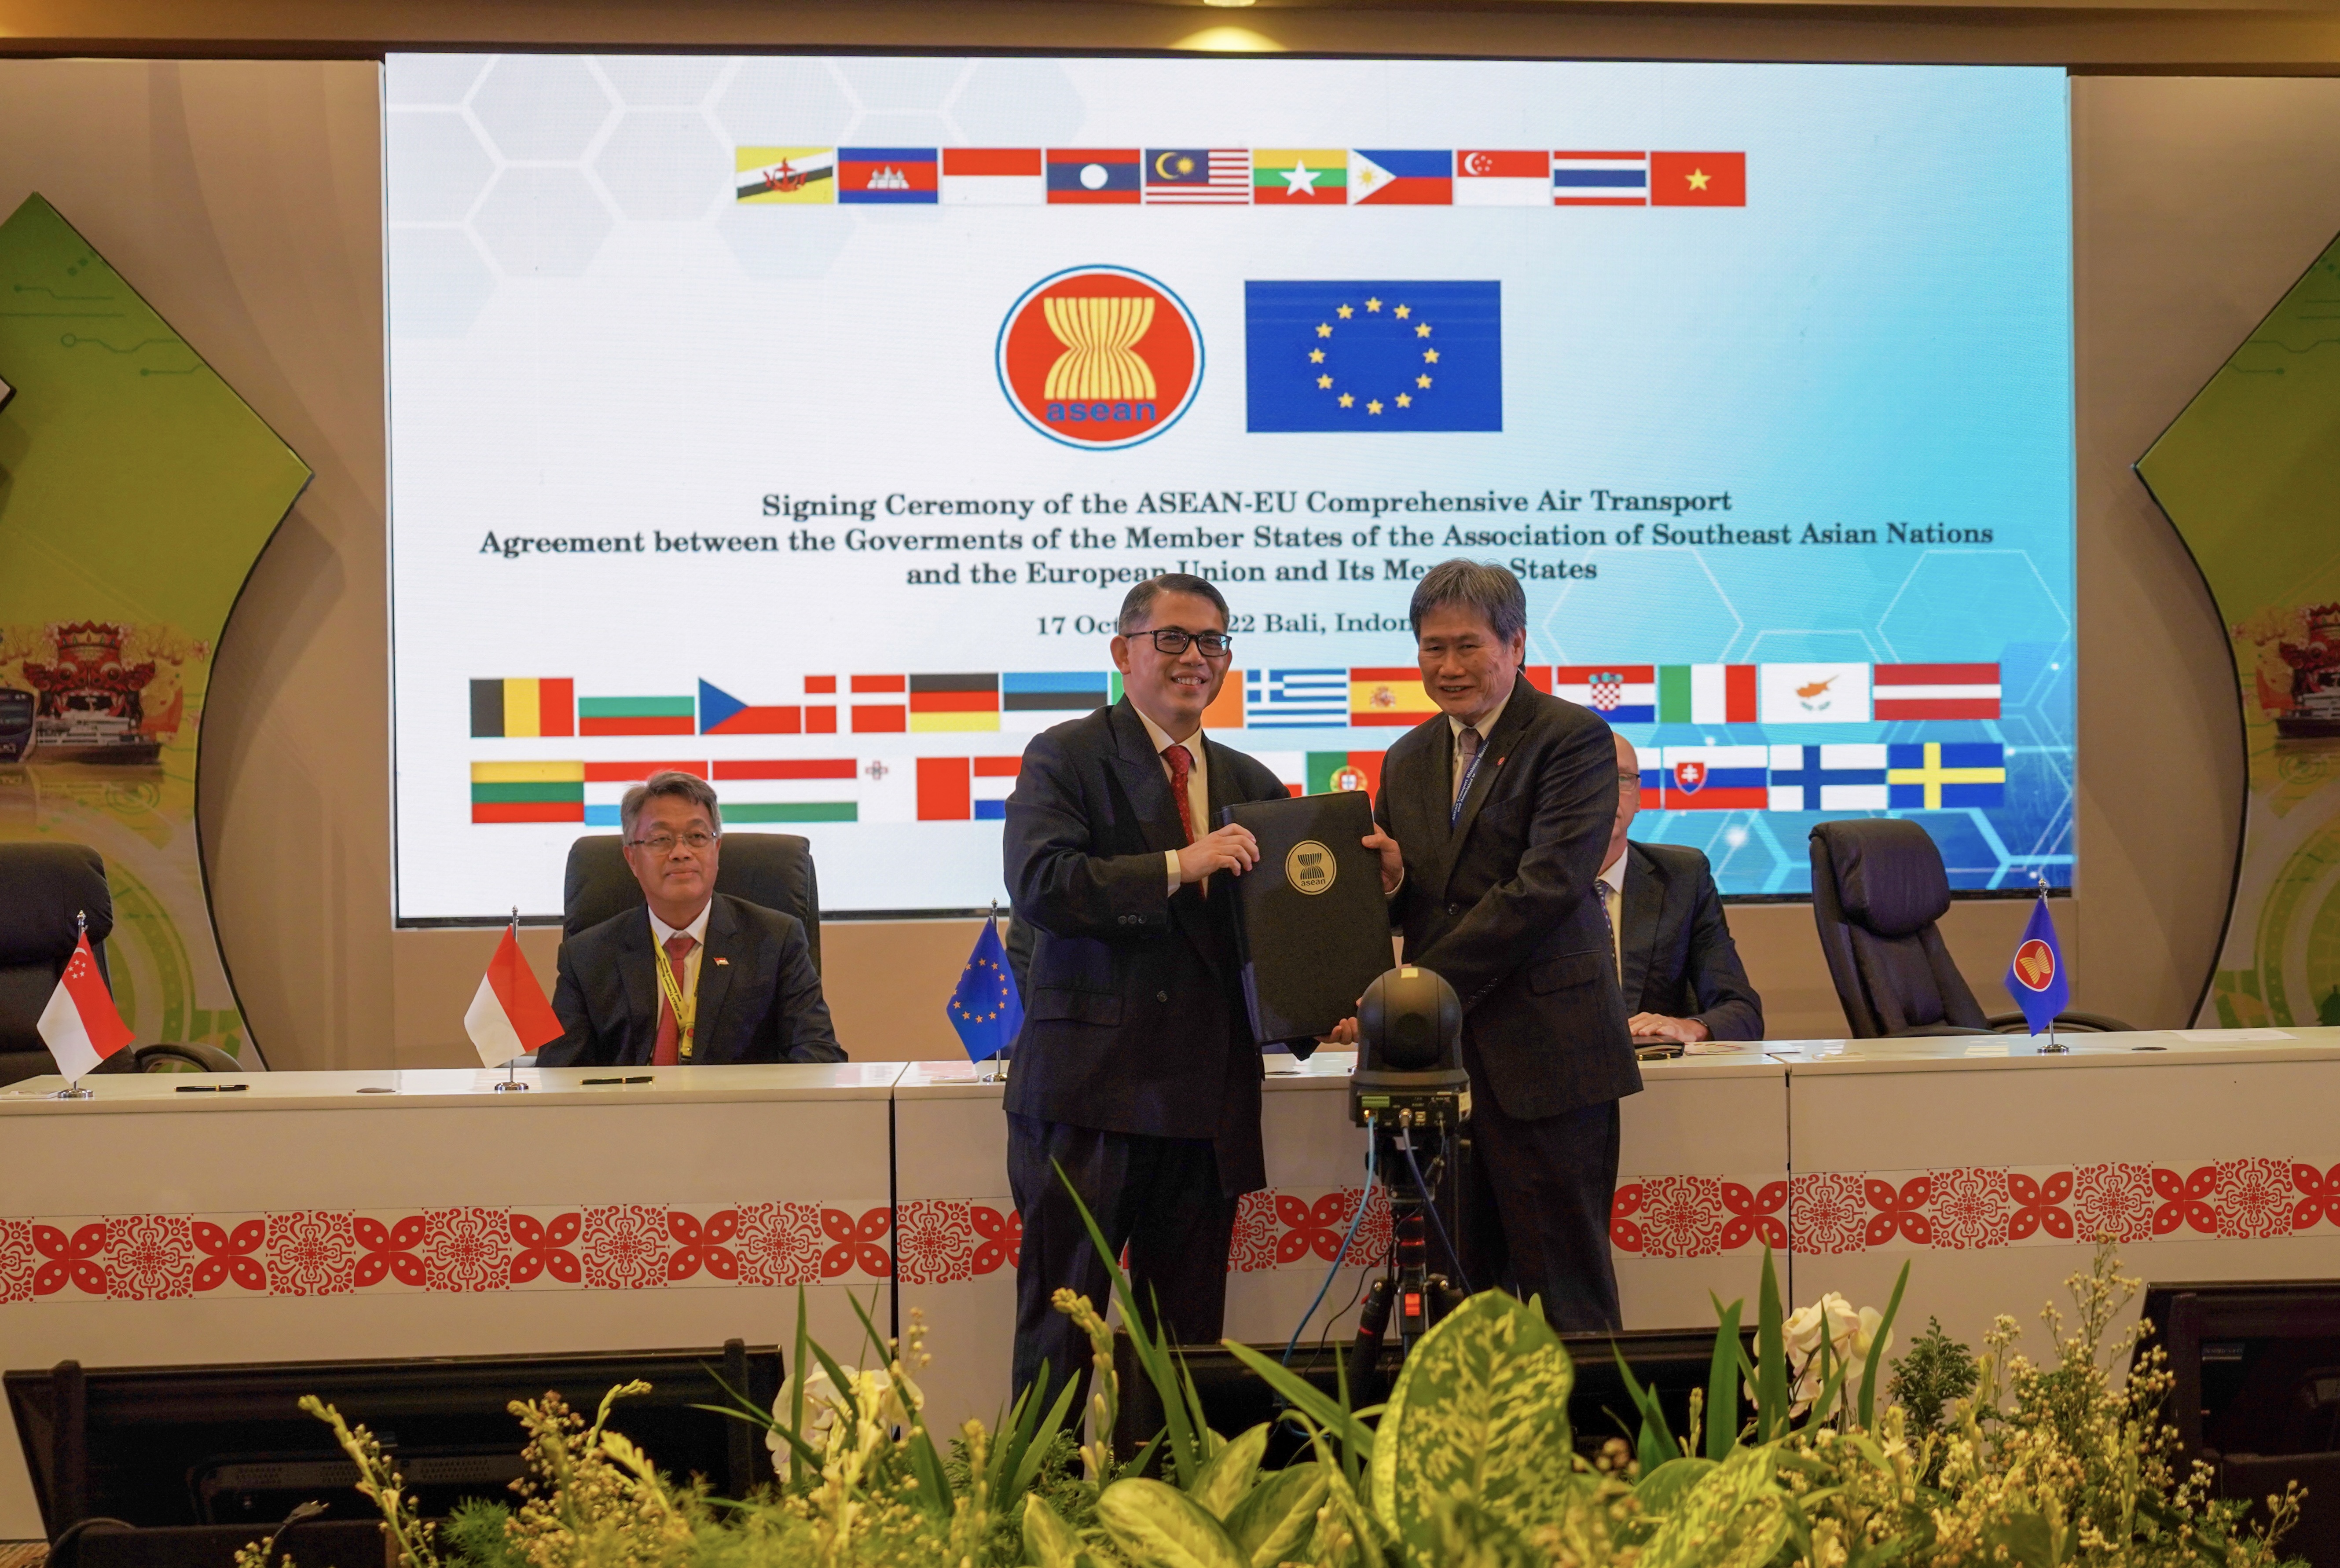 Mr Loh Ngai Seng, Permanent Secretary for Transport of Singapore, and Dato Lim Jock Hoi, ASEAN Secretary General, at the signing of the Comprehensive Air Transport Agreement between Member States of the Association of Southeast Asian Nations, and the European Union and its Member States